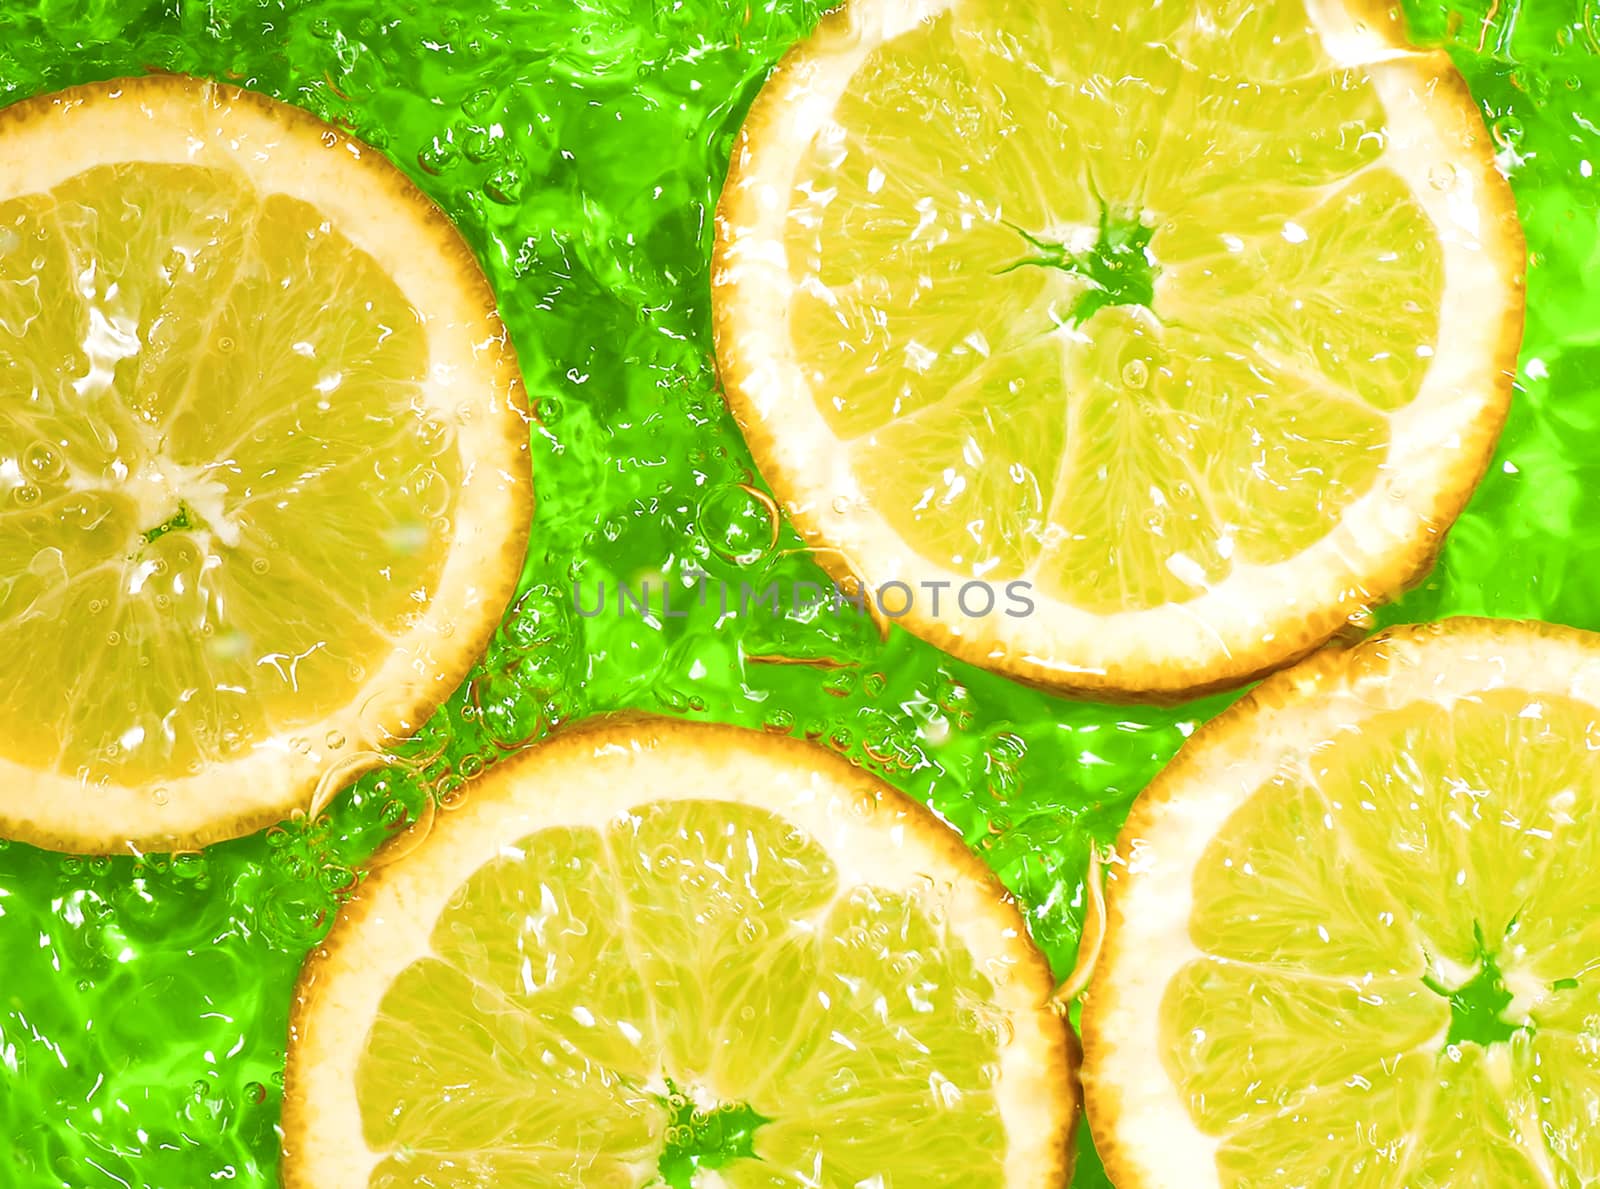 orange slice in green water with waves